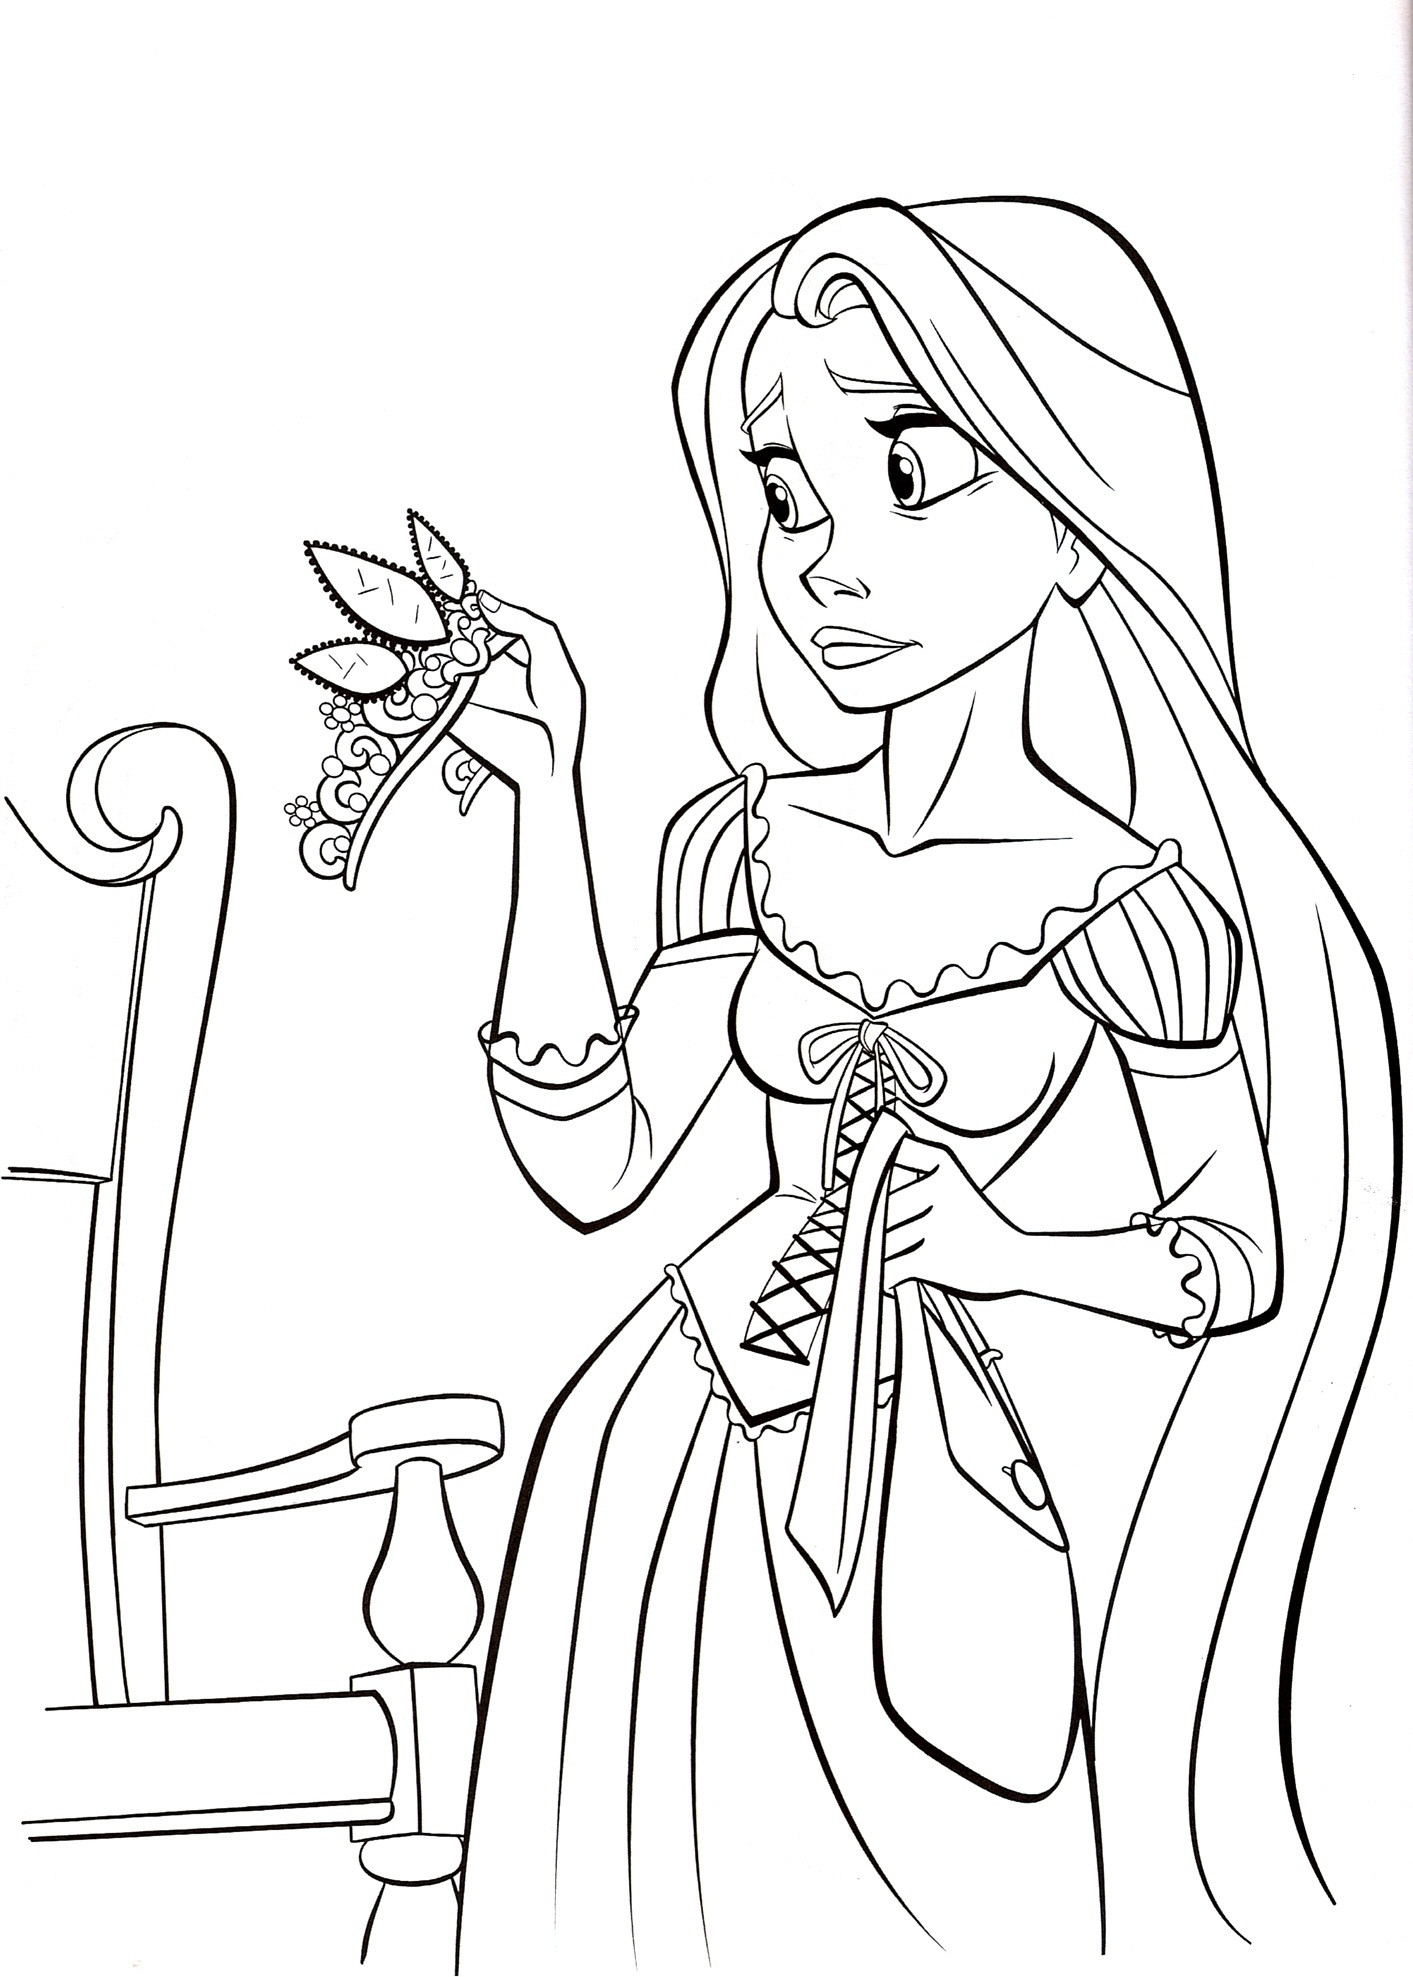 Printable Coloring Pages Disney
 Free Printable Tangled Coloring Pages For Kids